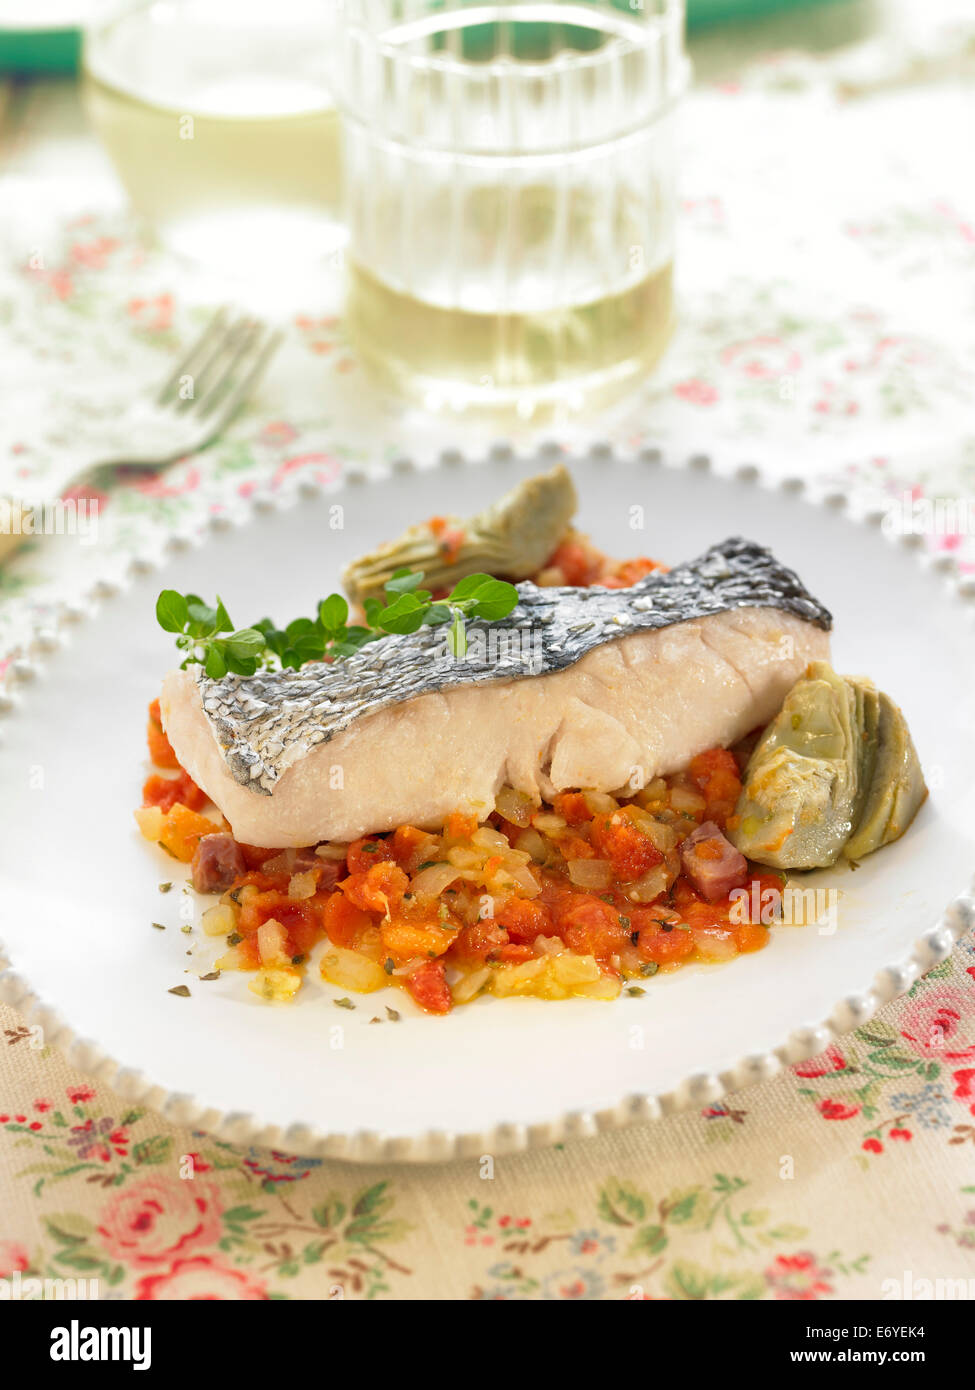 Cod and diced vegetables Stock Photo